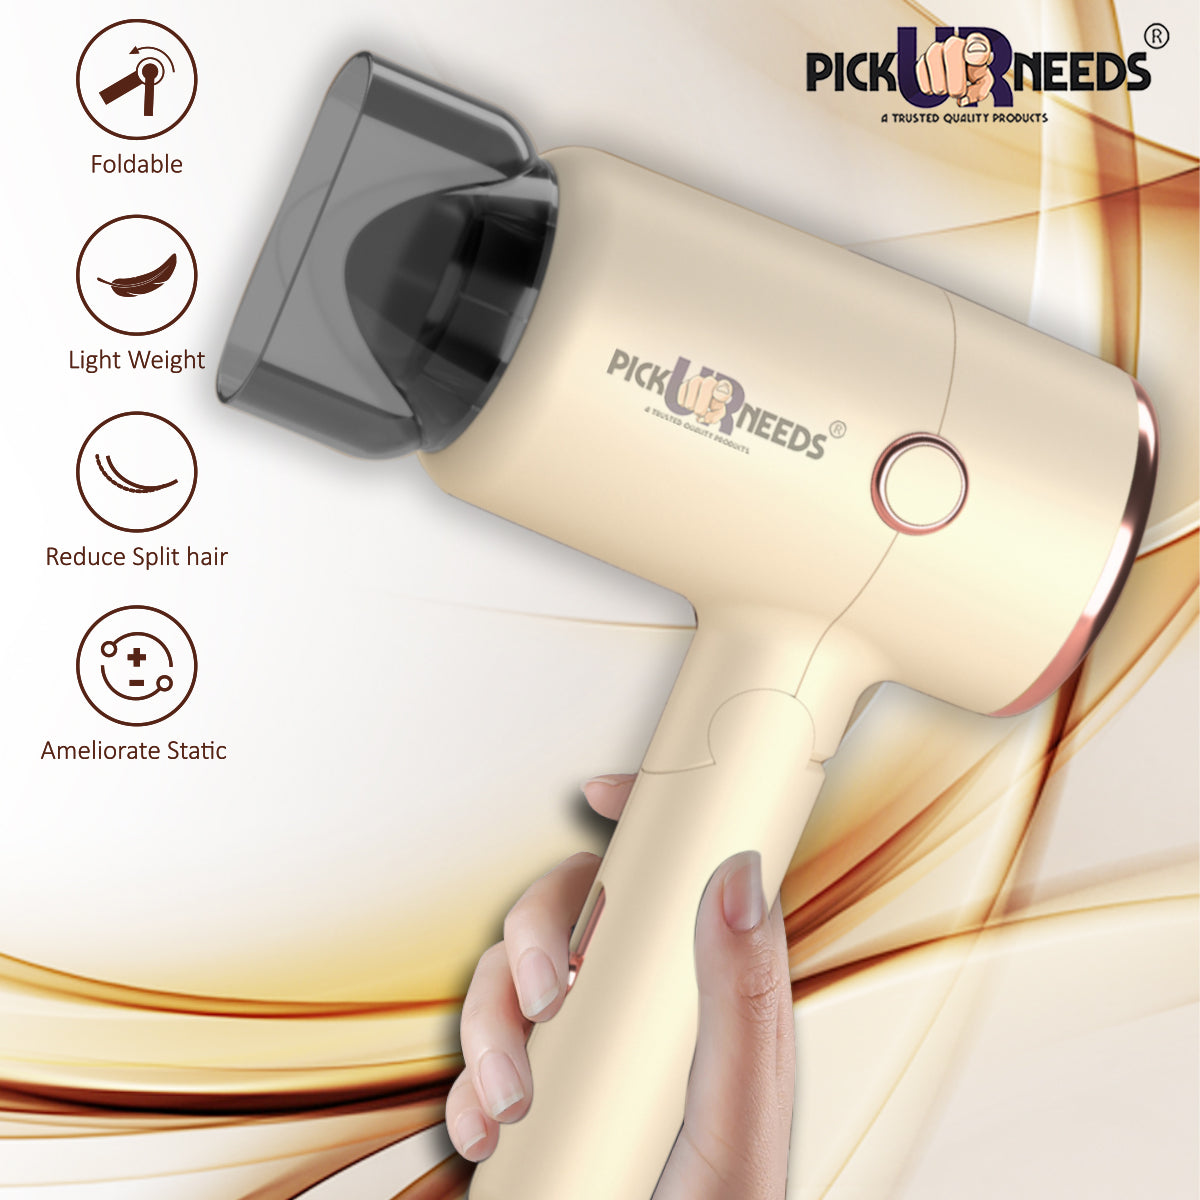 Pick Ur Needs Hair Dryer Stylish 2000W Mini Professional Hot & Cold with Handle Foldable,2 comb & Nozzle For Men & Women